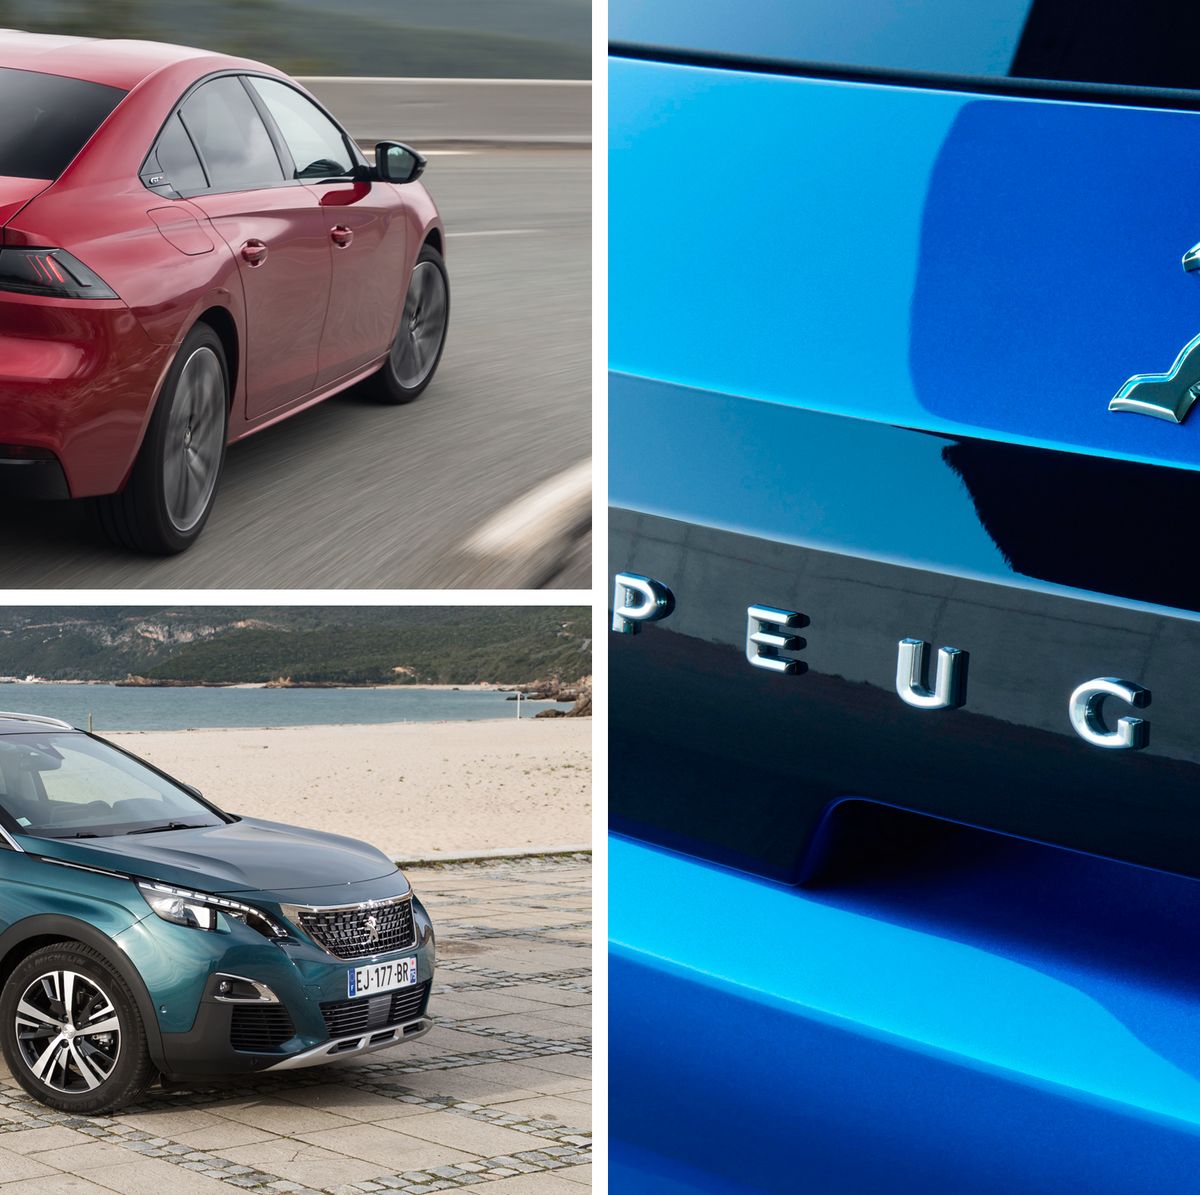 Peugeot Lineup of French Cars and SUVs – Returning to the U.S.